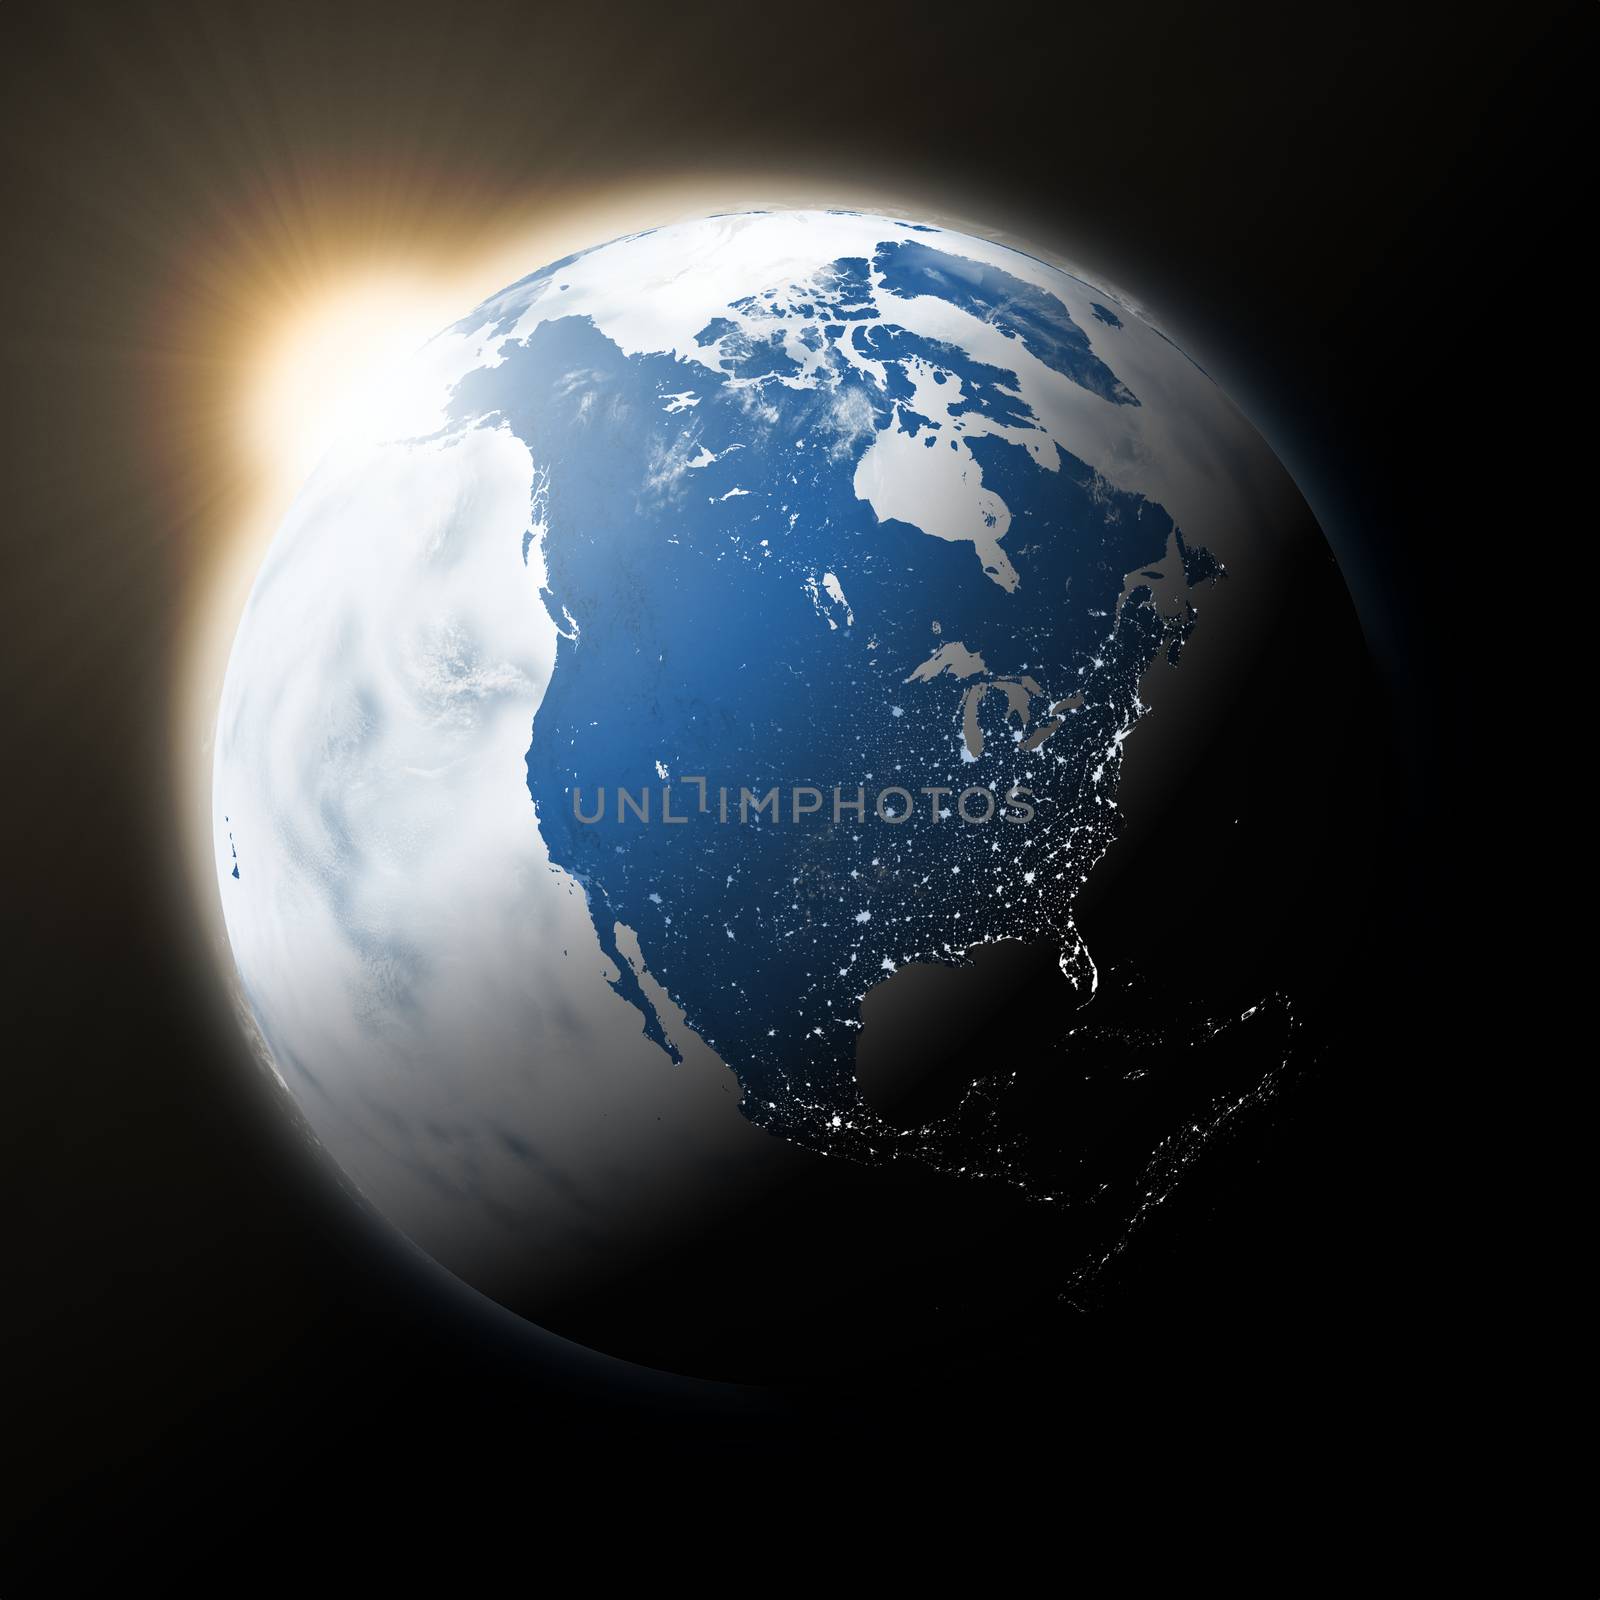 Sun over North America on blue planet Earth isolated on black background. Highly detailed planet surface. Elements of this image furnished by NASA.